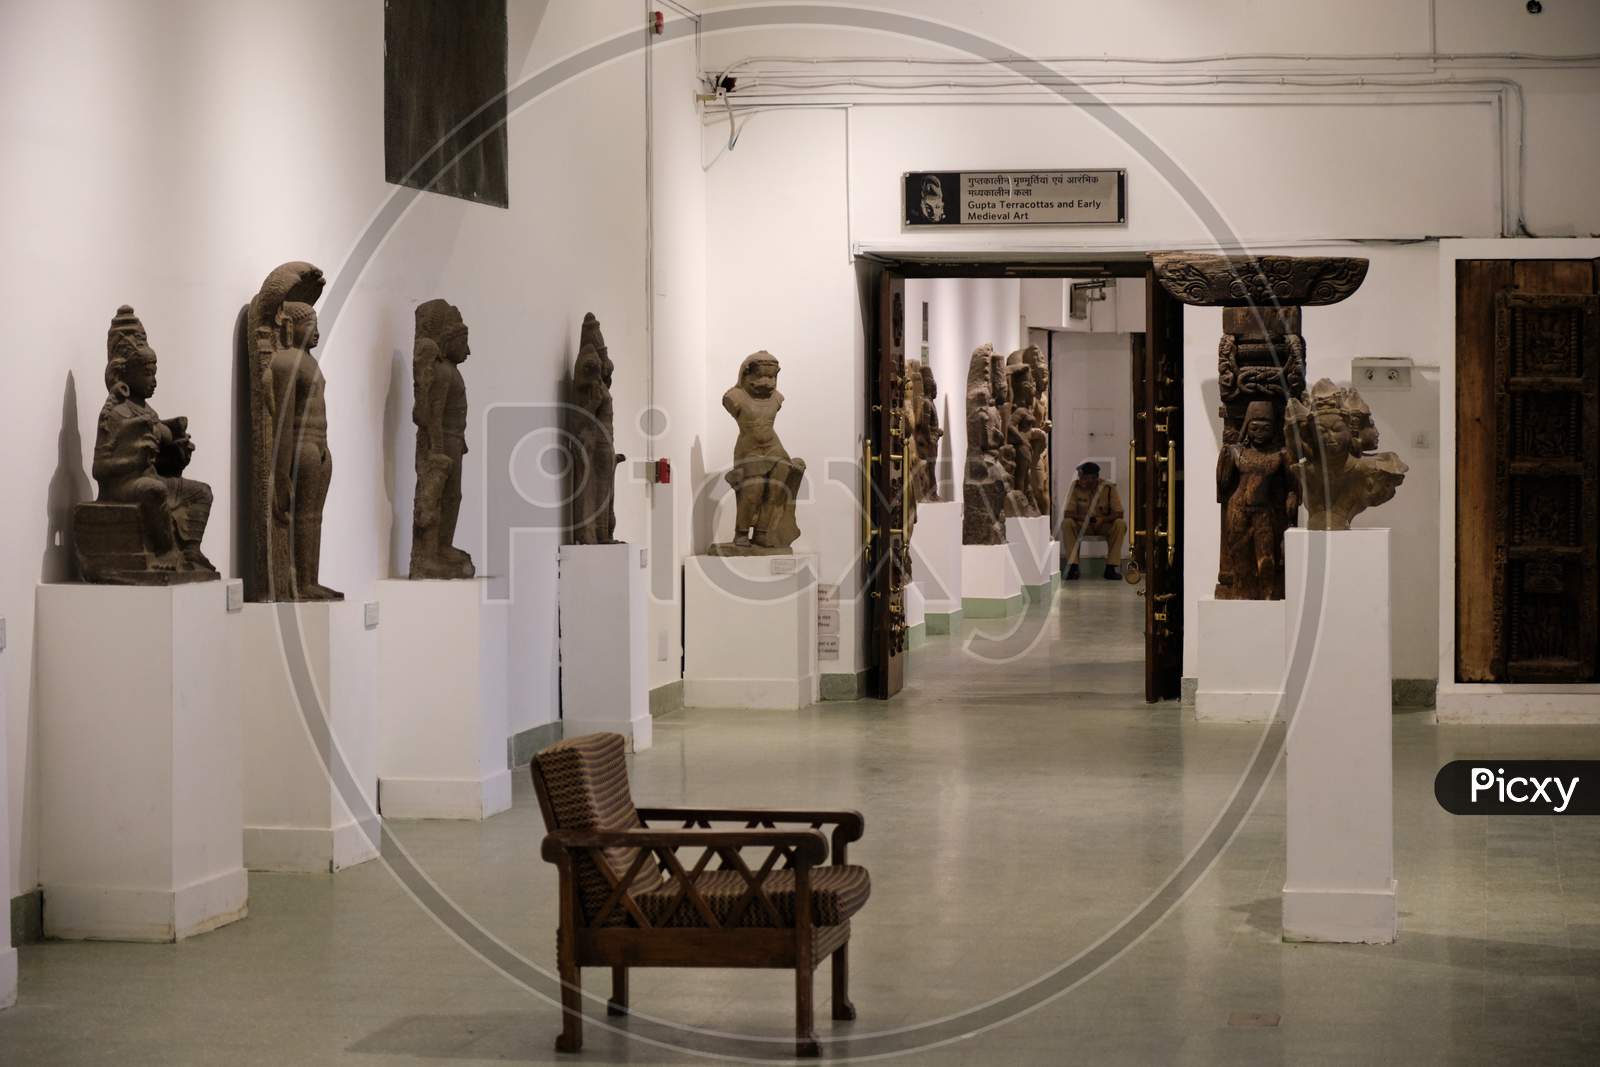 Ancient Sculptures In The National Museum Of India In New Delhi Which Houses Collection Of Artifacts Of 5,000 Years Of Indian Civilization, Culture And History